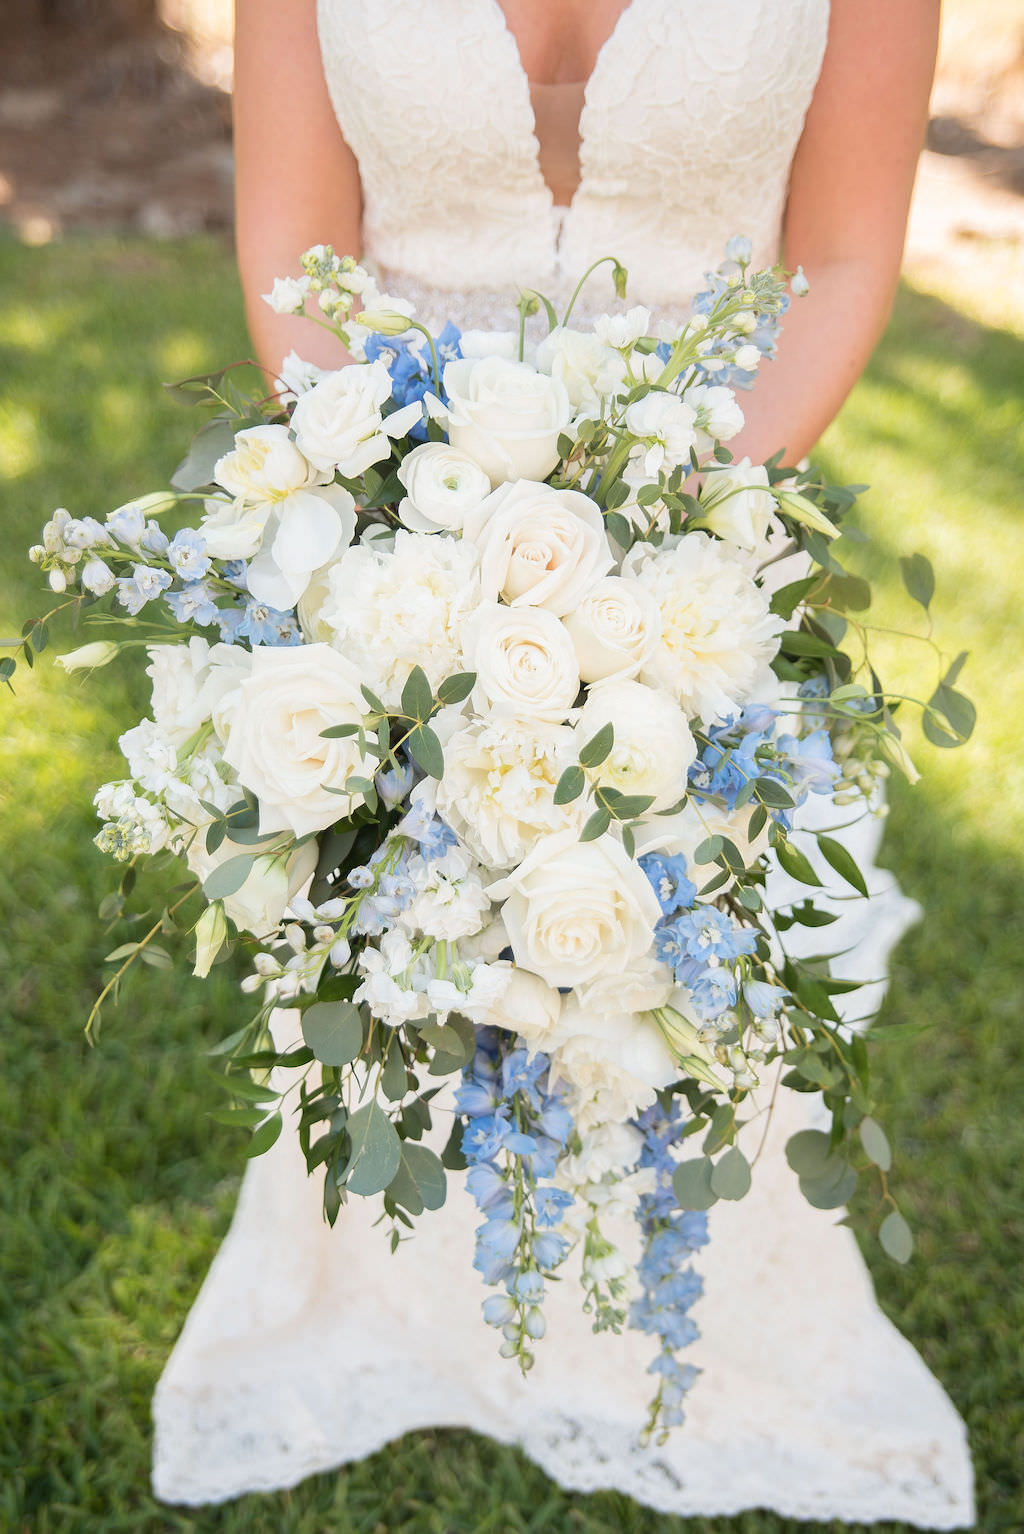 Bride Wedding Portrait in Mikaella Lace Wedding Dress with Plunging V Neckline and Cap Sleeves and Rhinestone Crystal Belt Holding Ivory, White, Blue and Greenery Organic Floral Bridal Bouquet | Tampa Bay Kristen Marie Photography